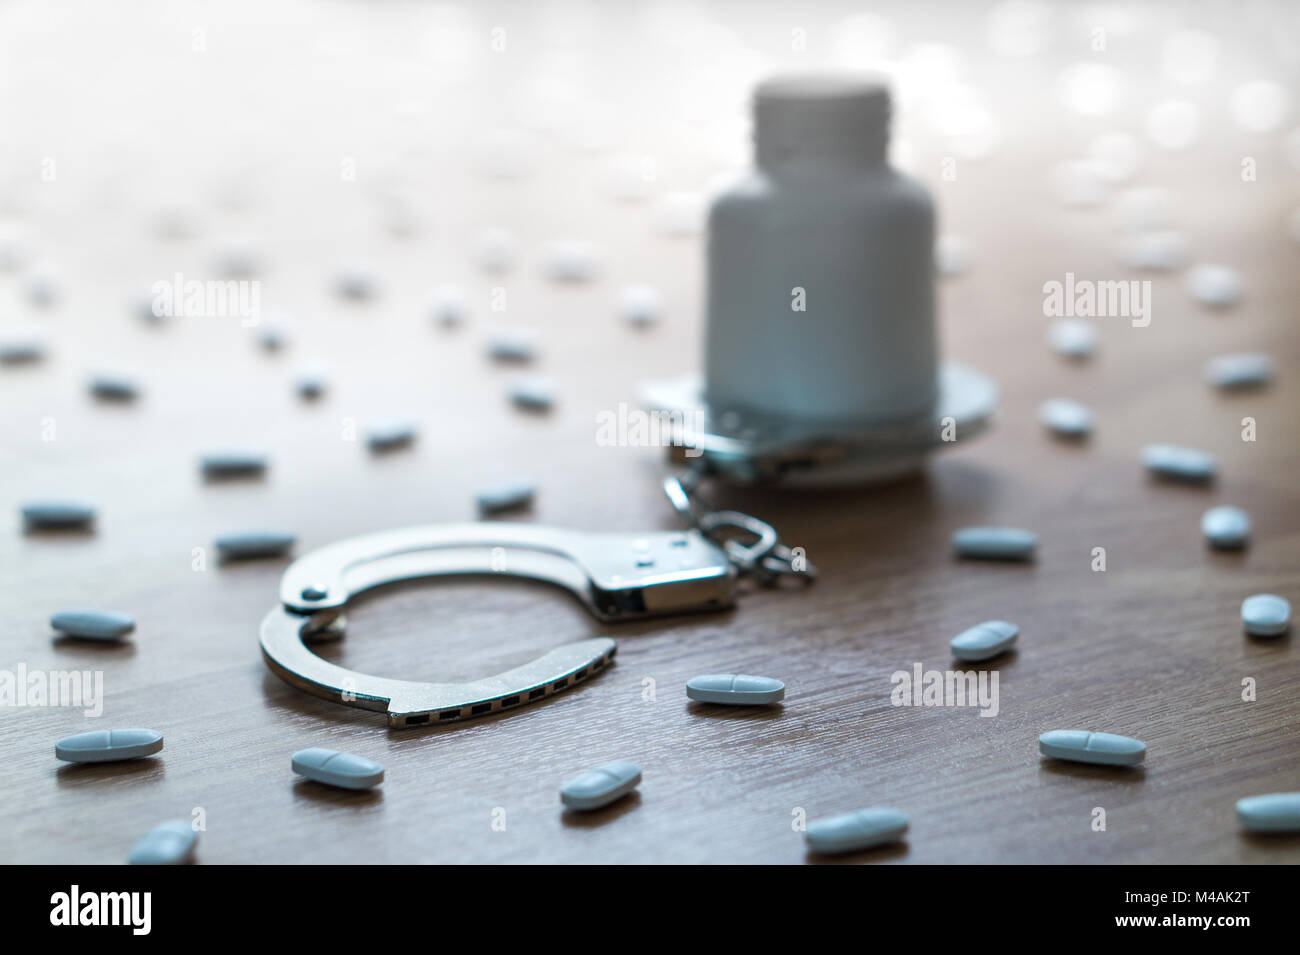 Drug addiction, medical abuse and narcotics hook and dependence concept. Medicine bottle handcuffed and surrounded by many pills. Tablet overdose. Stock Photo